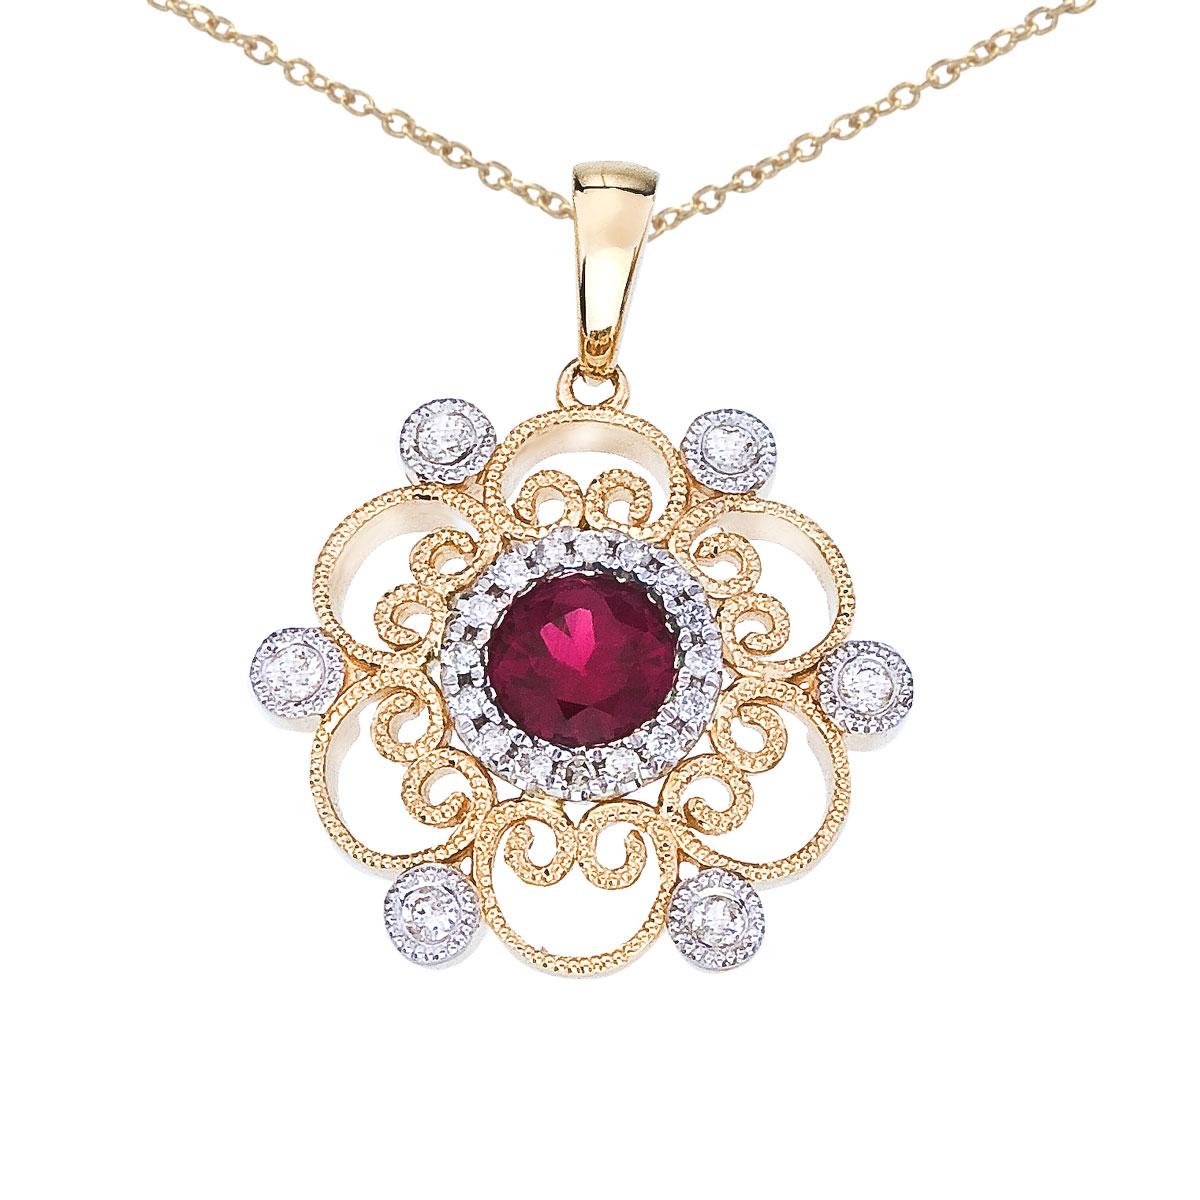 Sophisticated 14k two-toned gold pendant containing a vibrant 5 mm round ruby and .13 ct diamond ...